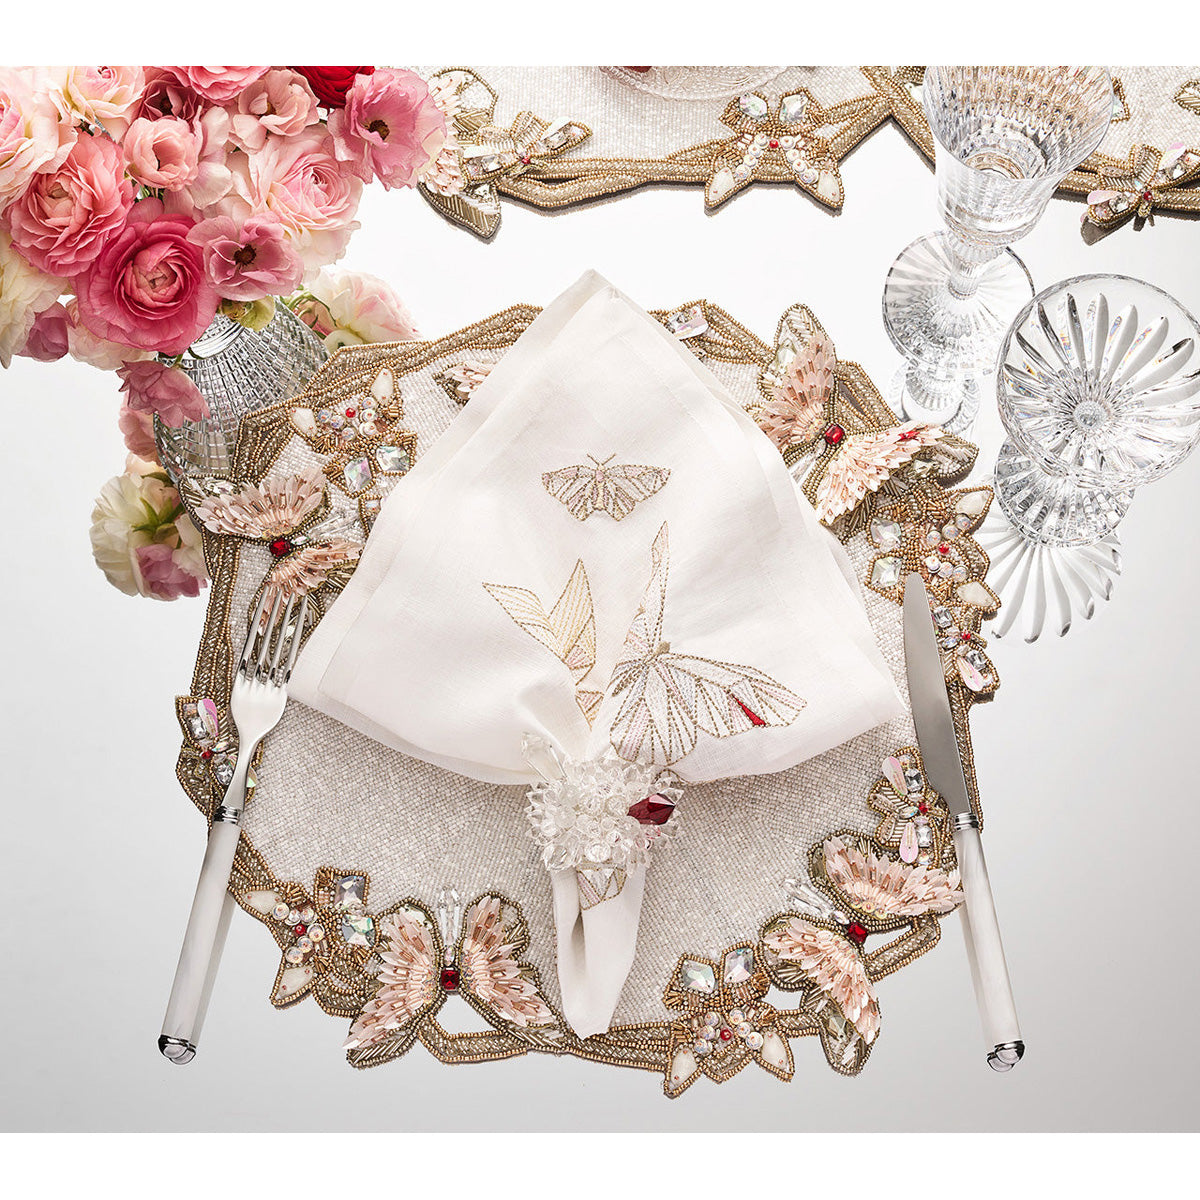 Diamant Butterflies Placemat in White & Blush - Set of 2 in a Gift Box by Kim Seybert Additional Image-1